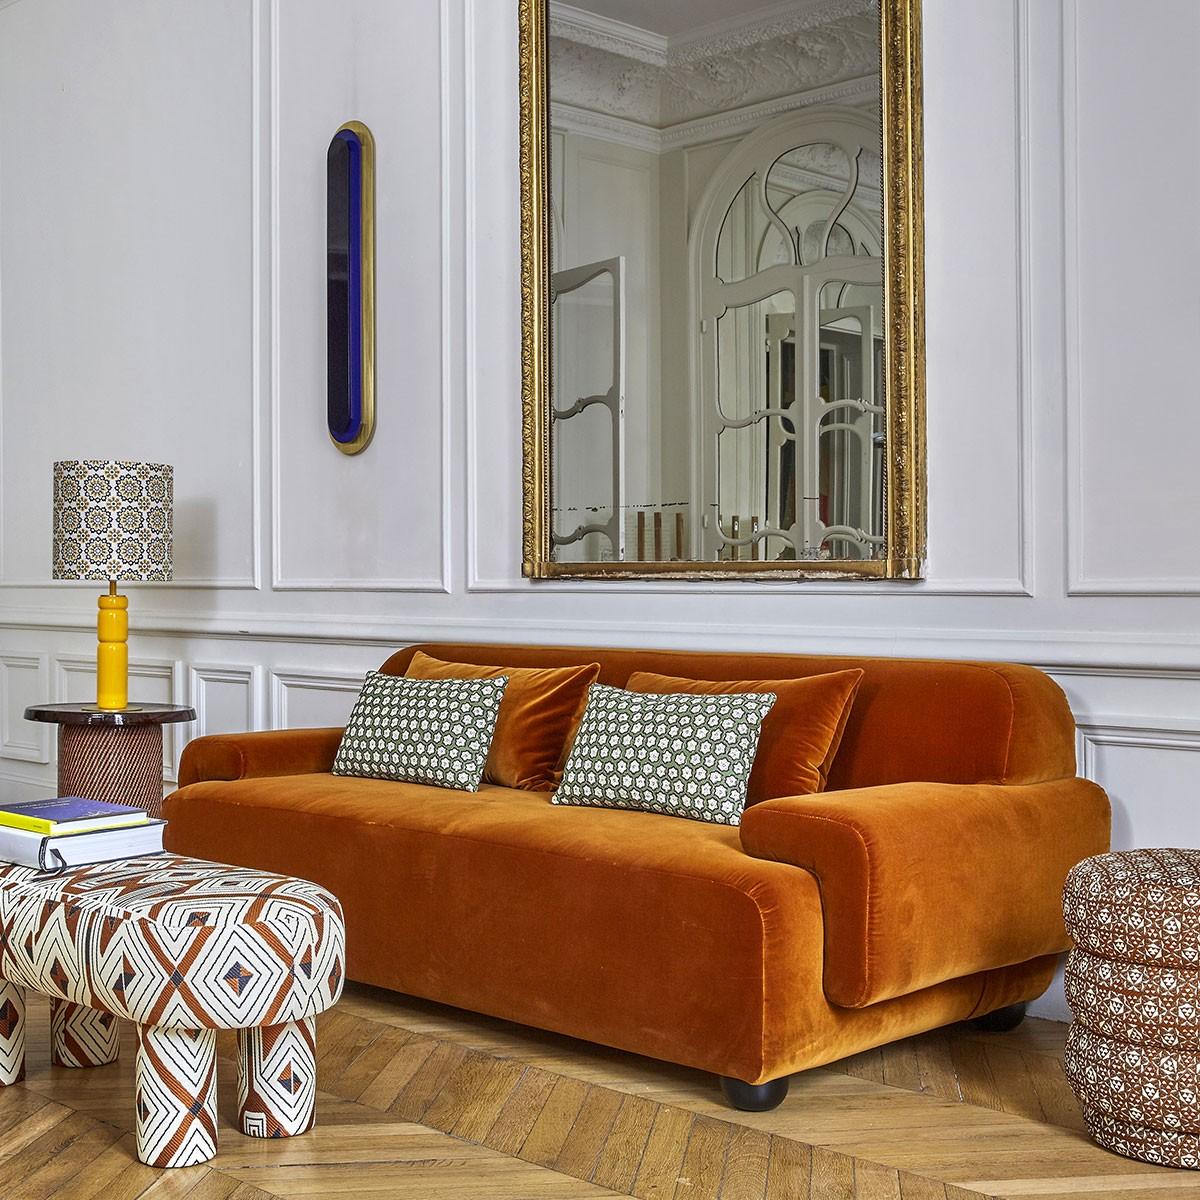 Popus editions lena 3 seater sofa in yellow como velvet upholstery.

It looks like it's straight out of a movie, with its generous curves and wide armrests. It is a real invitation to spend long Sundays with the family, comfortably seated in front